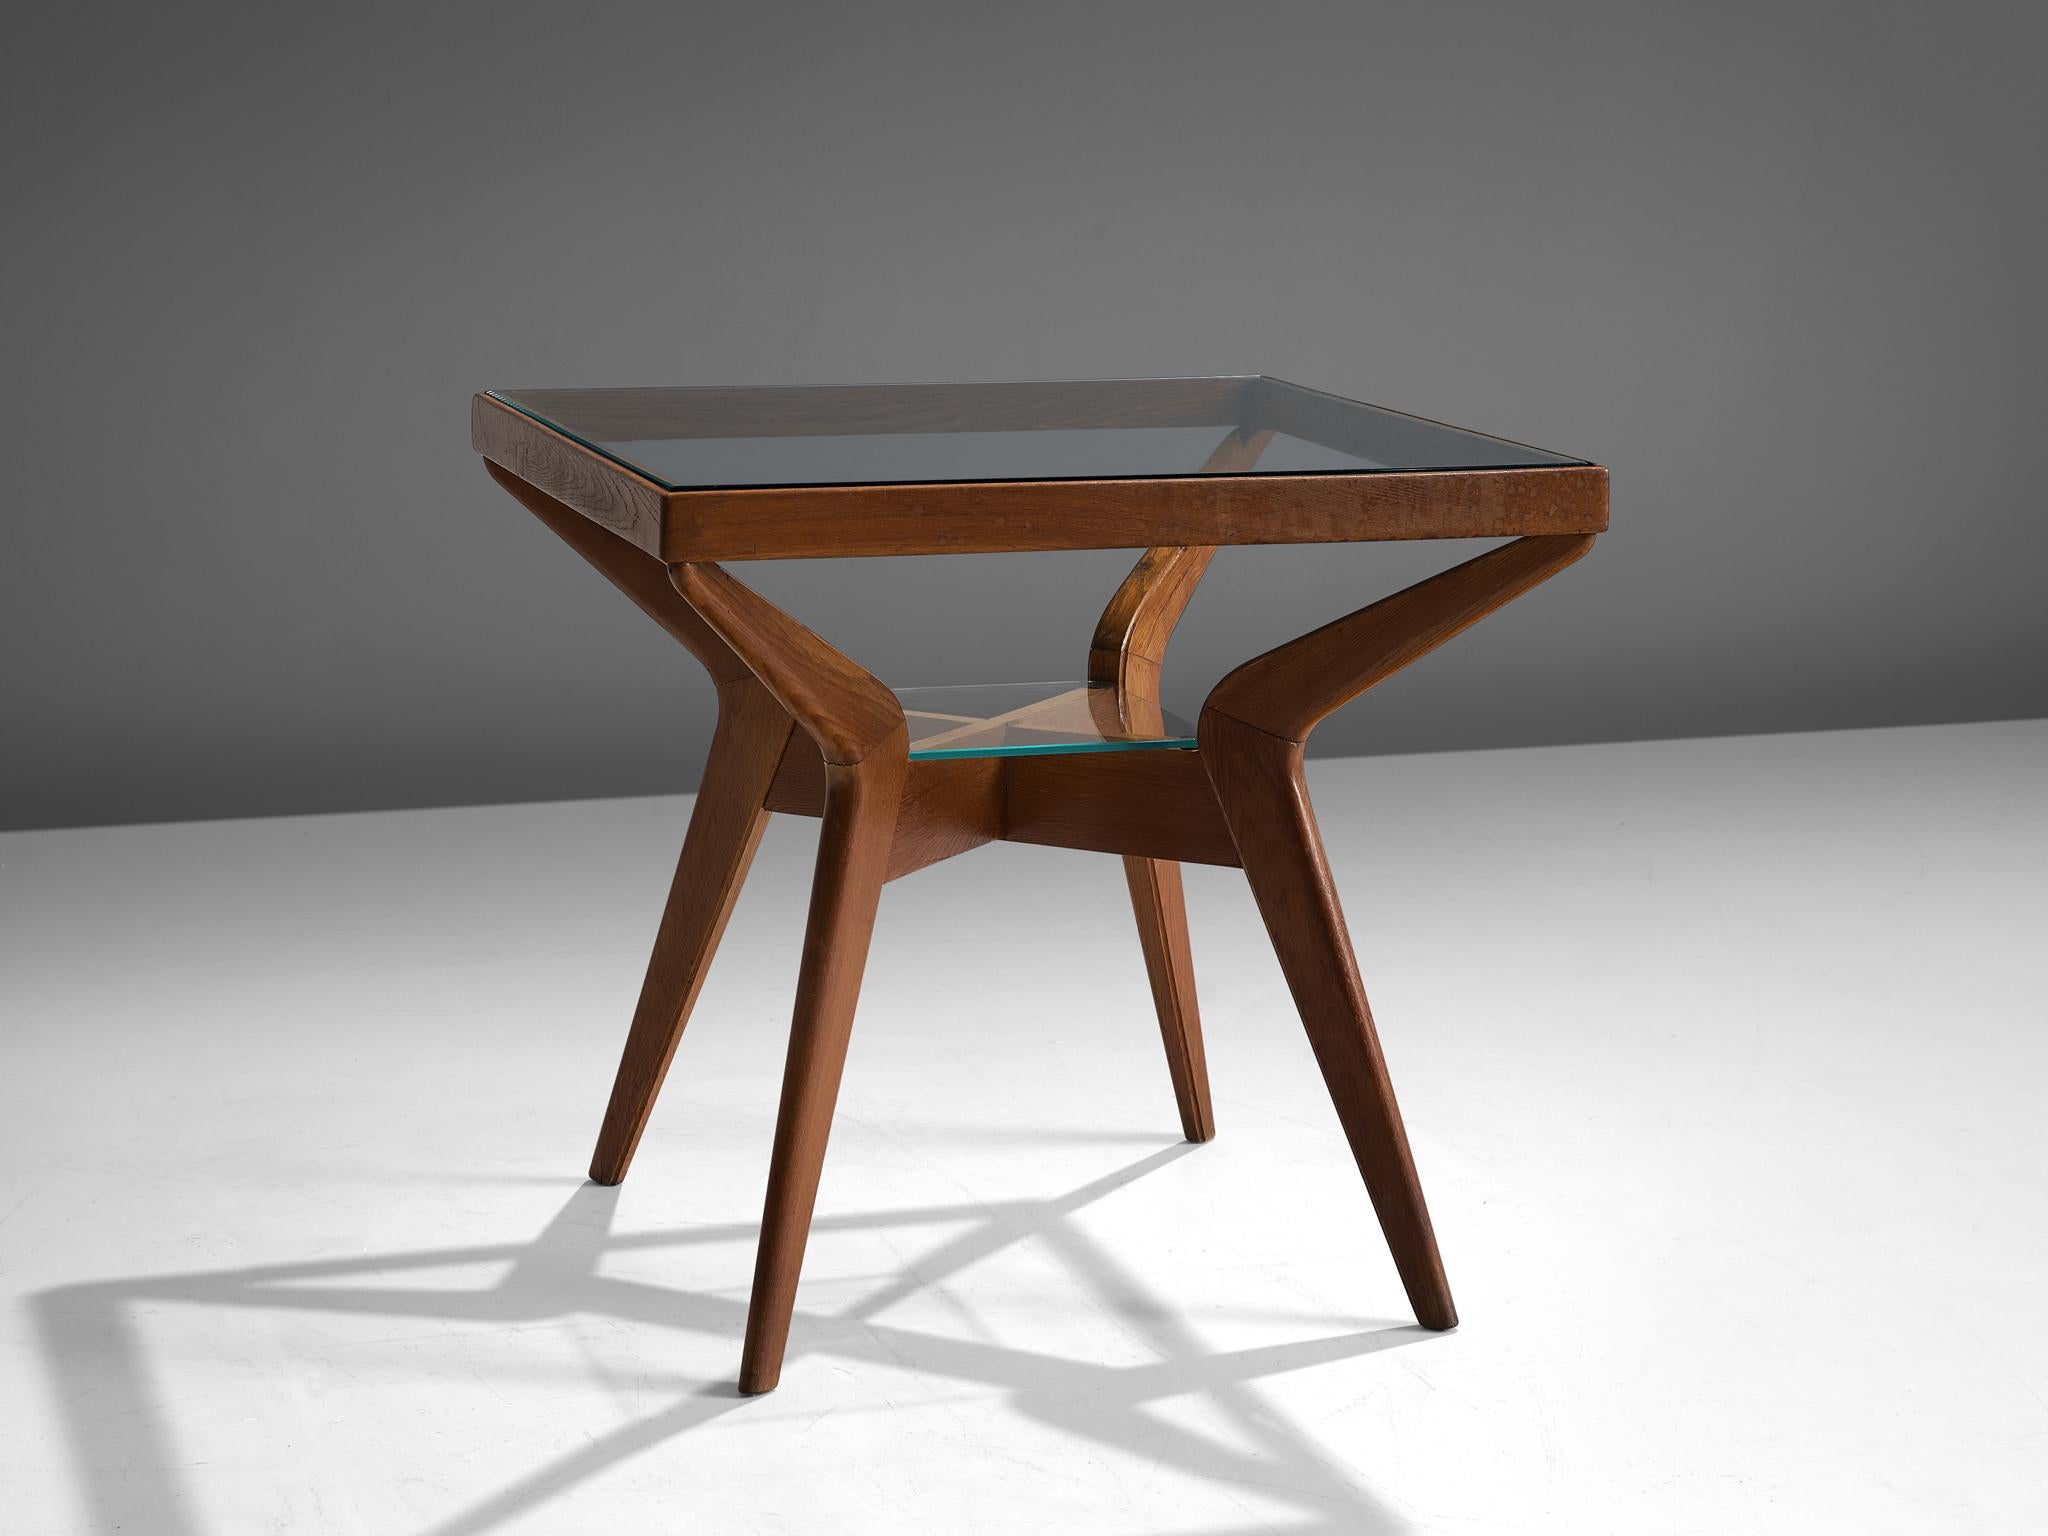 Side table in oak and glass, Italy, 1970s

This small coffee table has a well sized top in glass, framed in a solid wooden square. The top is held by four boomerang shaped legs, with rounded edges and tapered ends. In the middle of the base a small